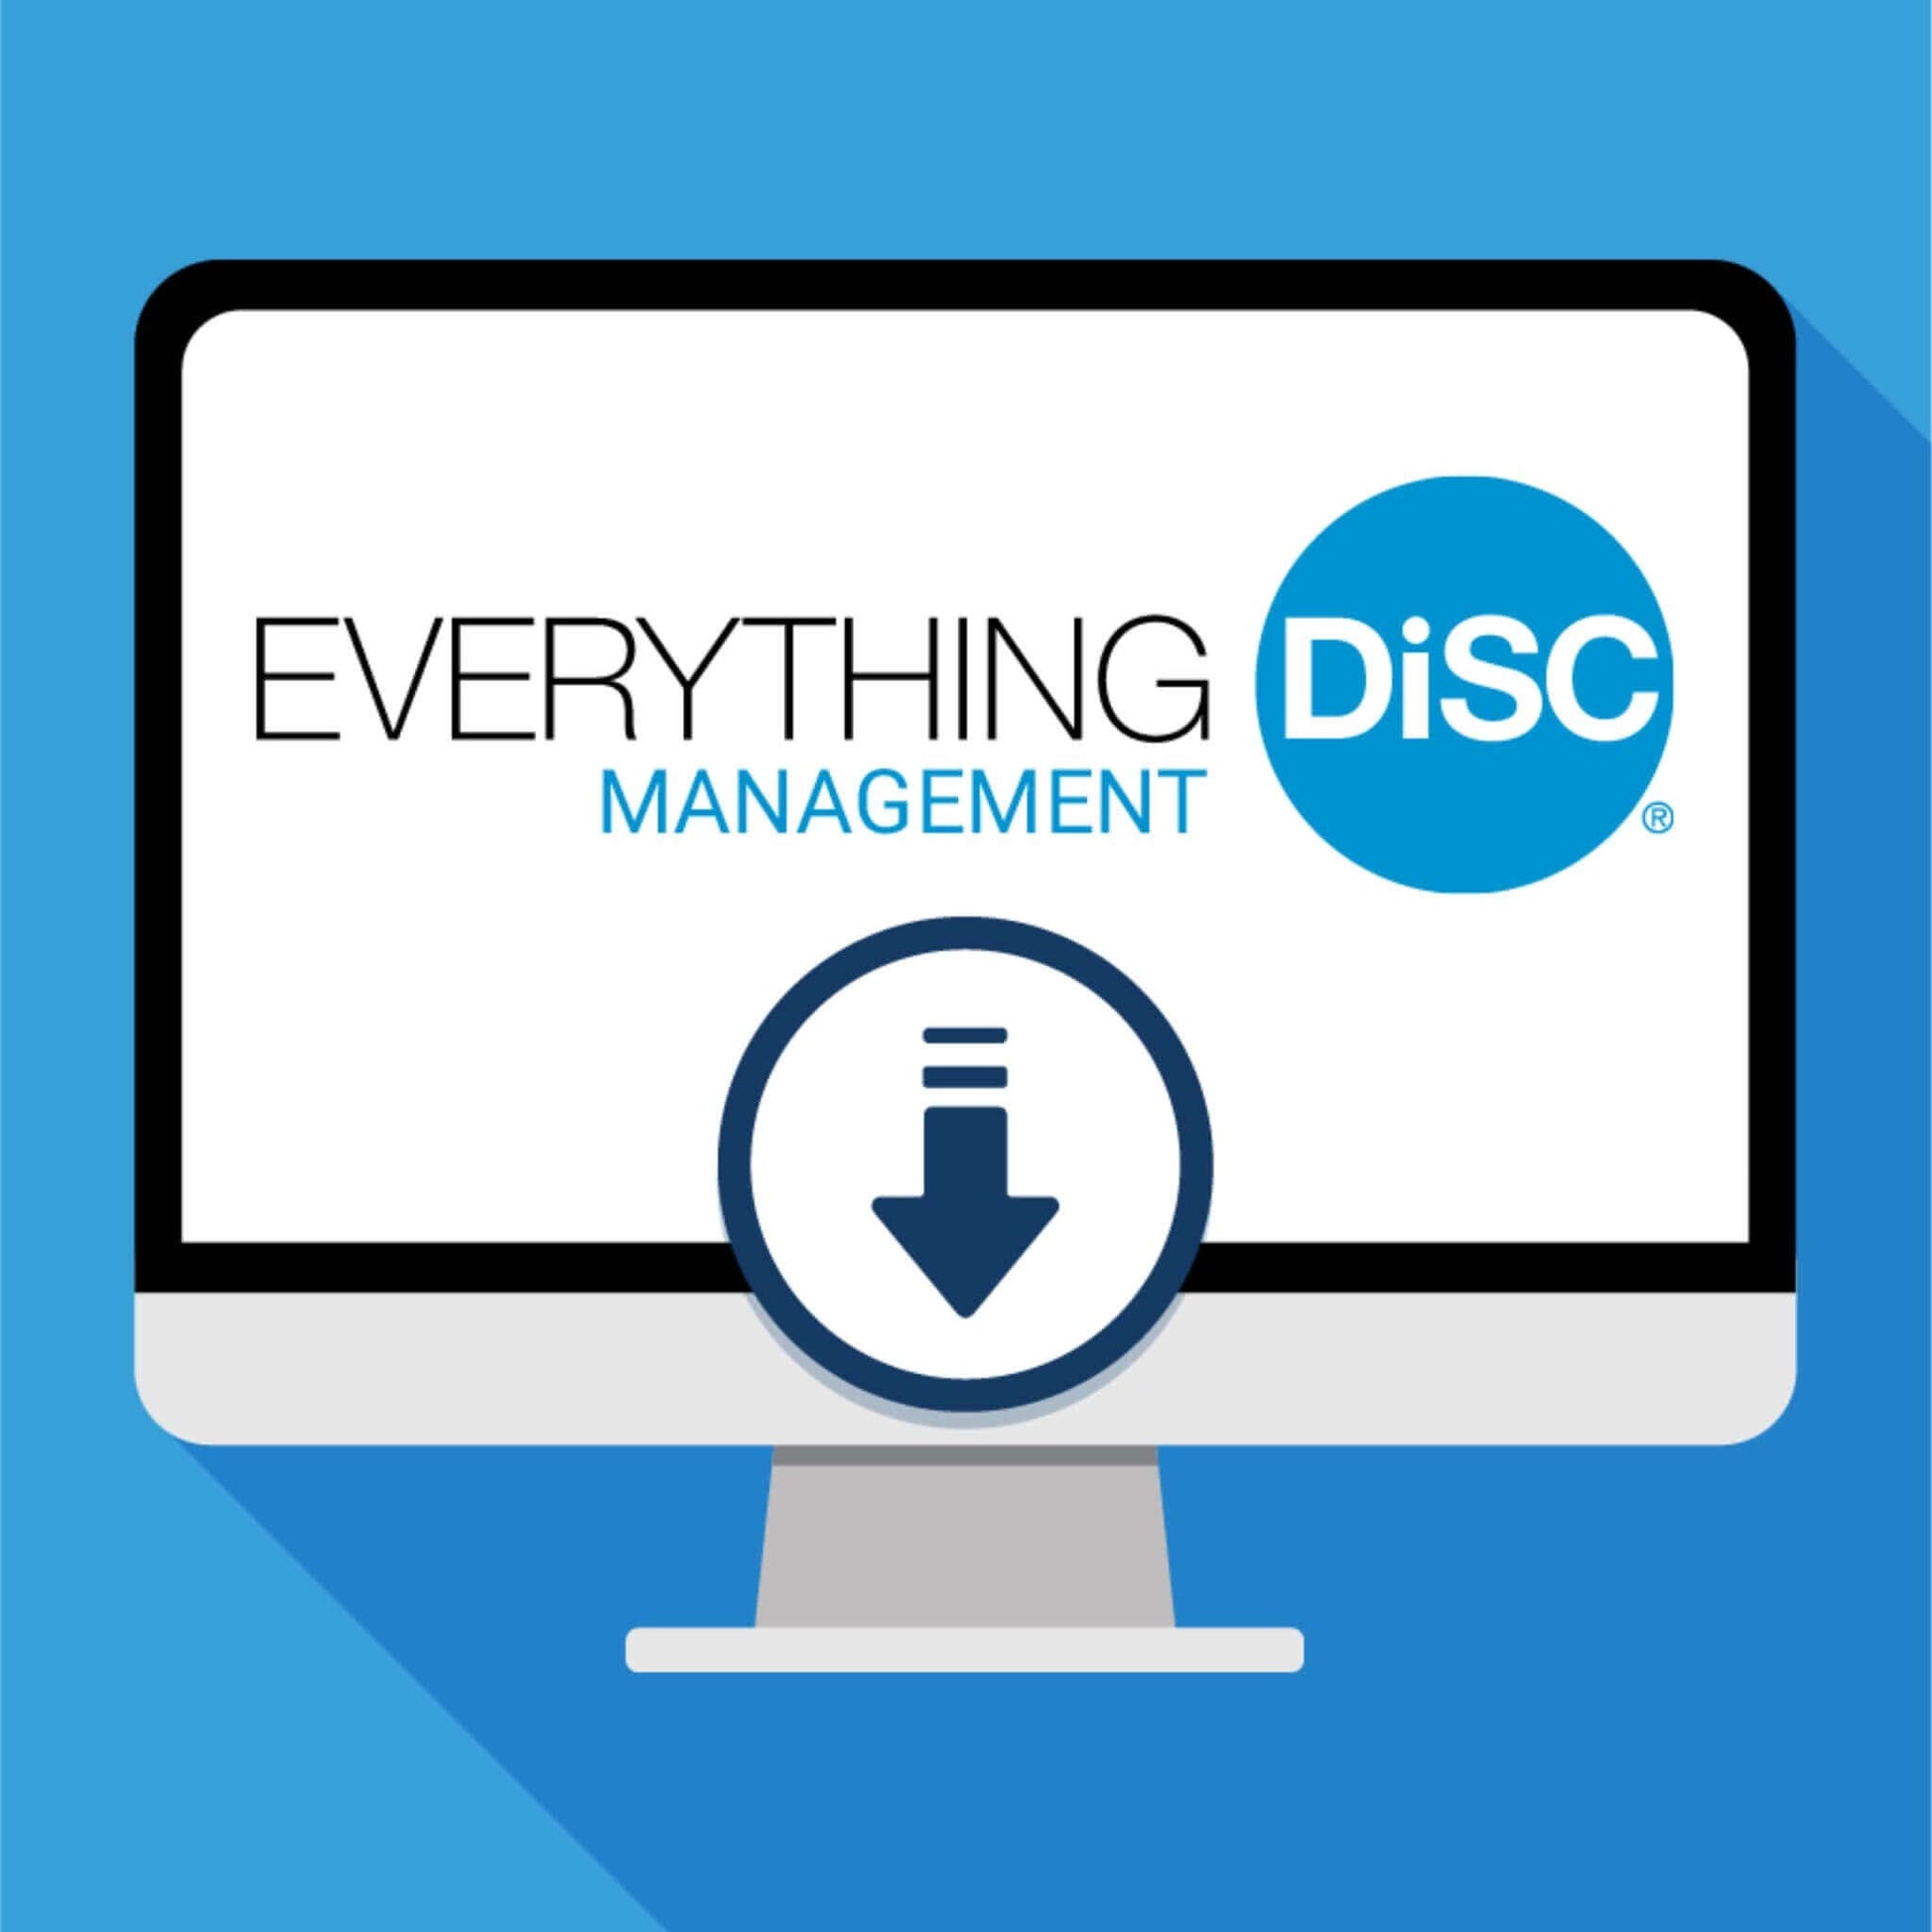 Everything DiSC tutor materials are for managers on DiSC